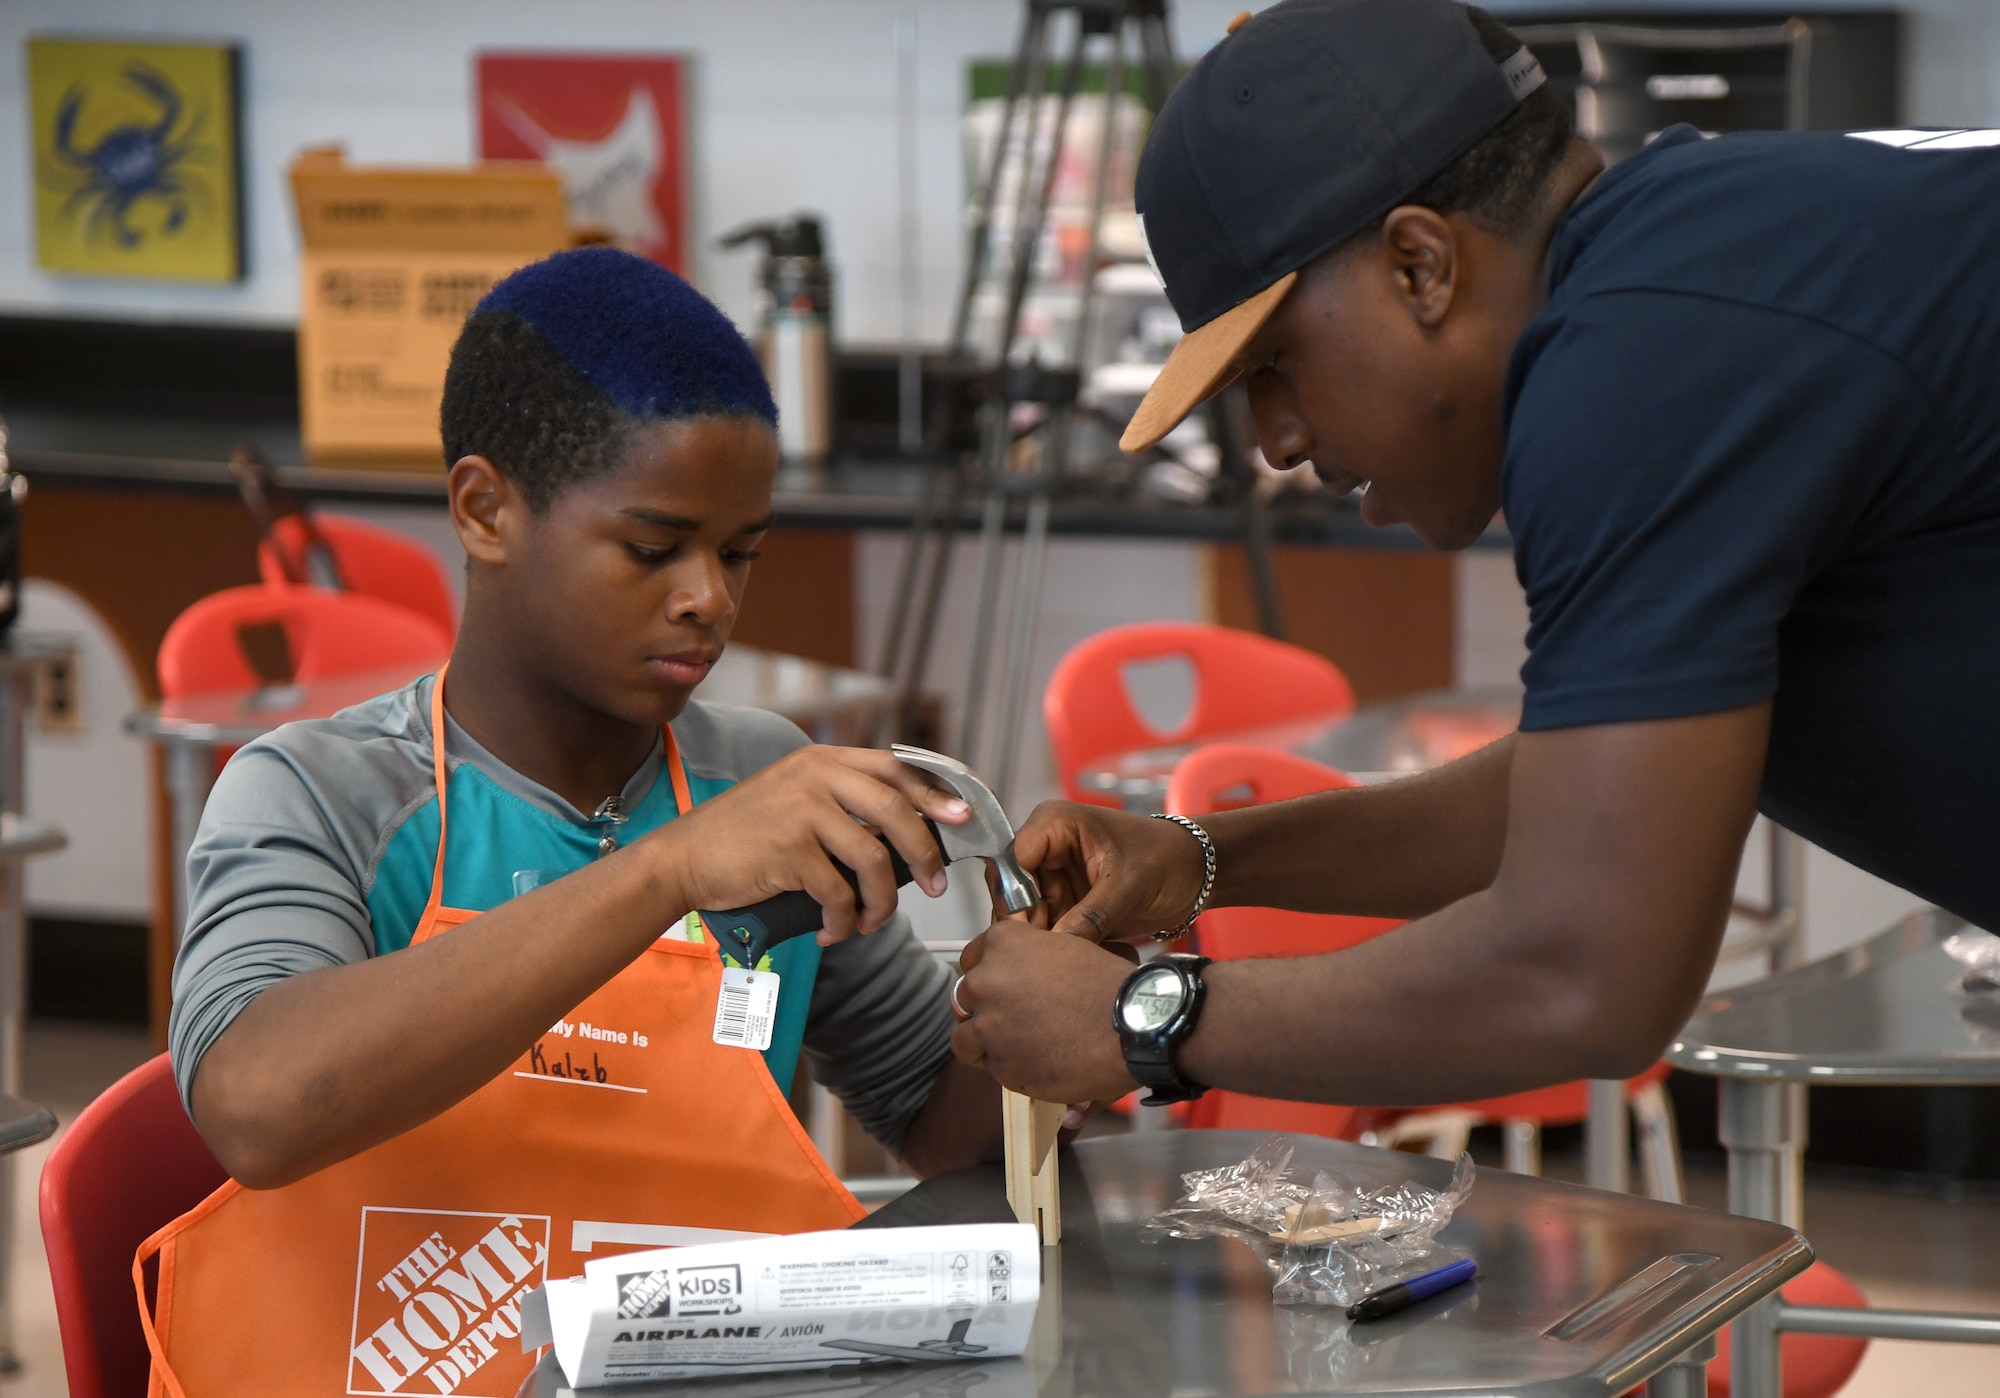 U.S. Air Force Staff Sgt. Dequanzel Davis, 338th Training Squadron radio frequency transmissions systems instructor, and Kaleb Foggie, Biloxi Junior High School eighth grade student, assemble a wooden airplane during the Biloxi Public Schools Science, Technology, Engineering and Mathematics Summer Camp program at Biloxi High School in Biloxi, Mississippi, June 25, 2019. The four-day STEM summer program teaches first through seventh grade students skills for future careers and fosters valuable life skills like problem solving, creativity and collaboration. Keesler personnel volunteered their time to lead instructions on various projects. (U.S. Air Force photo by Kemberly Groue)